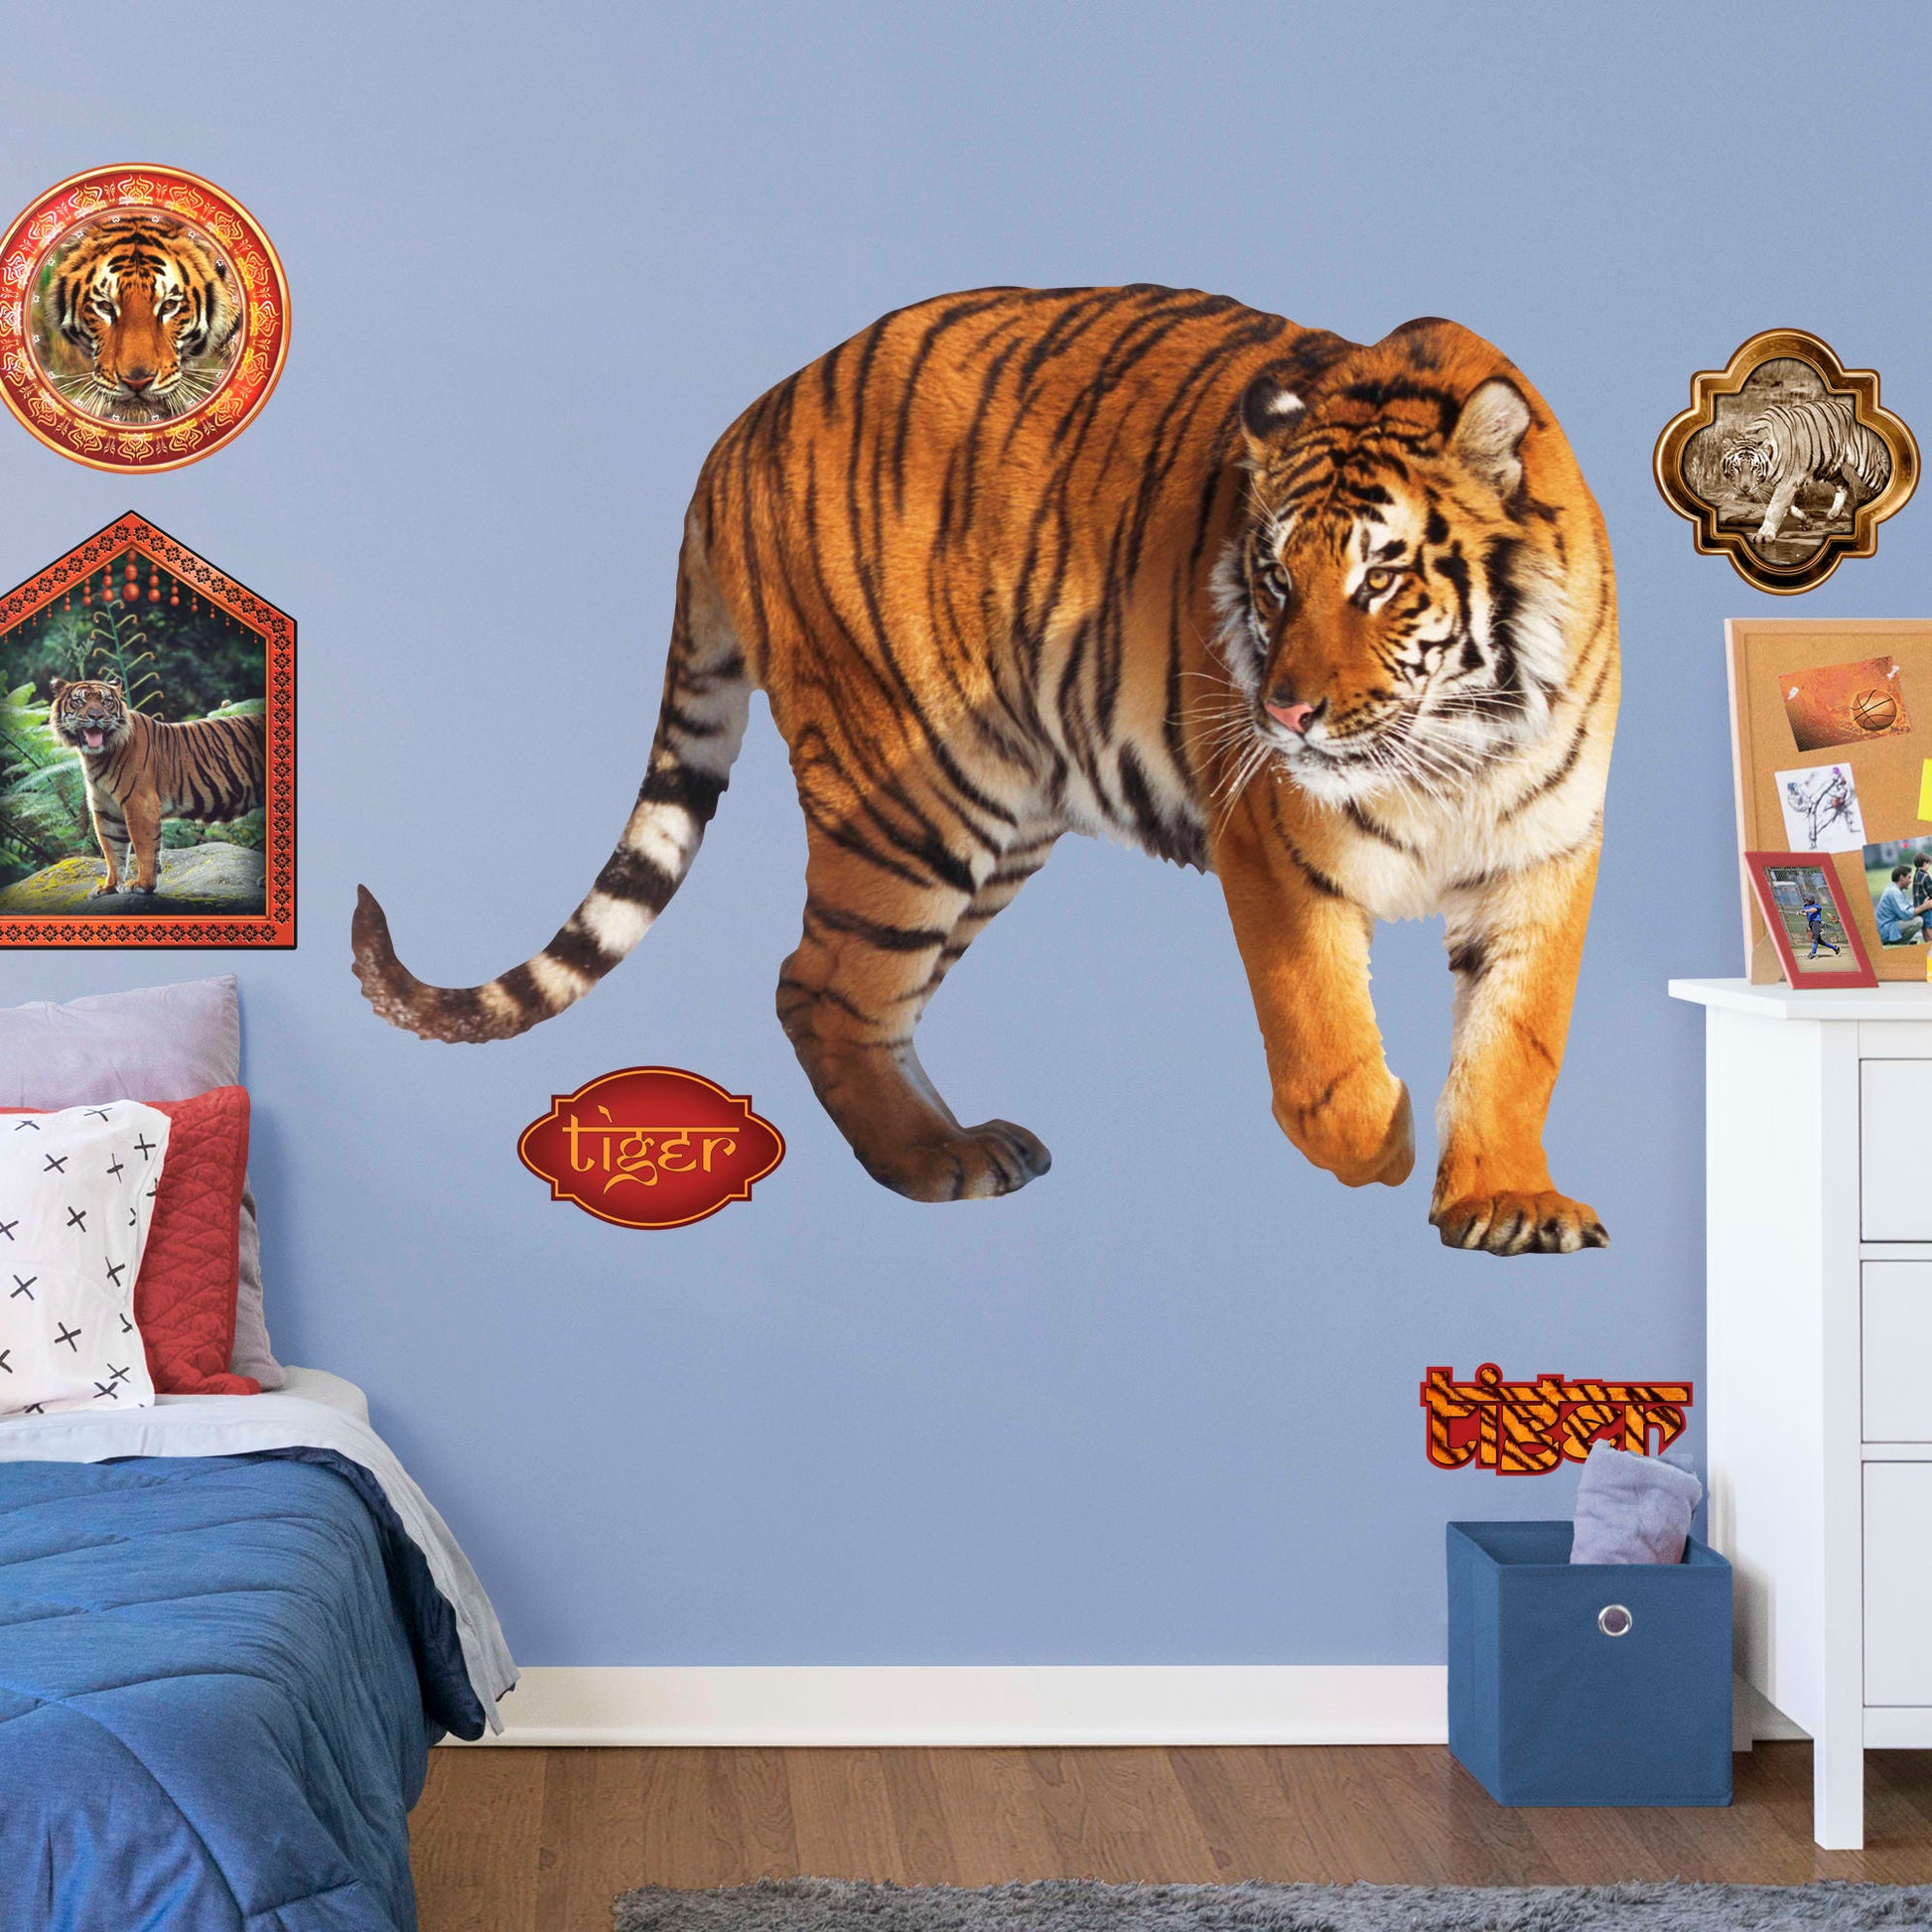 Life-Size Animal + 7 Licensed Decals (69"W x 53"H)